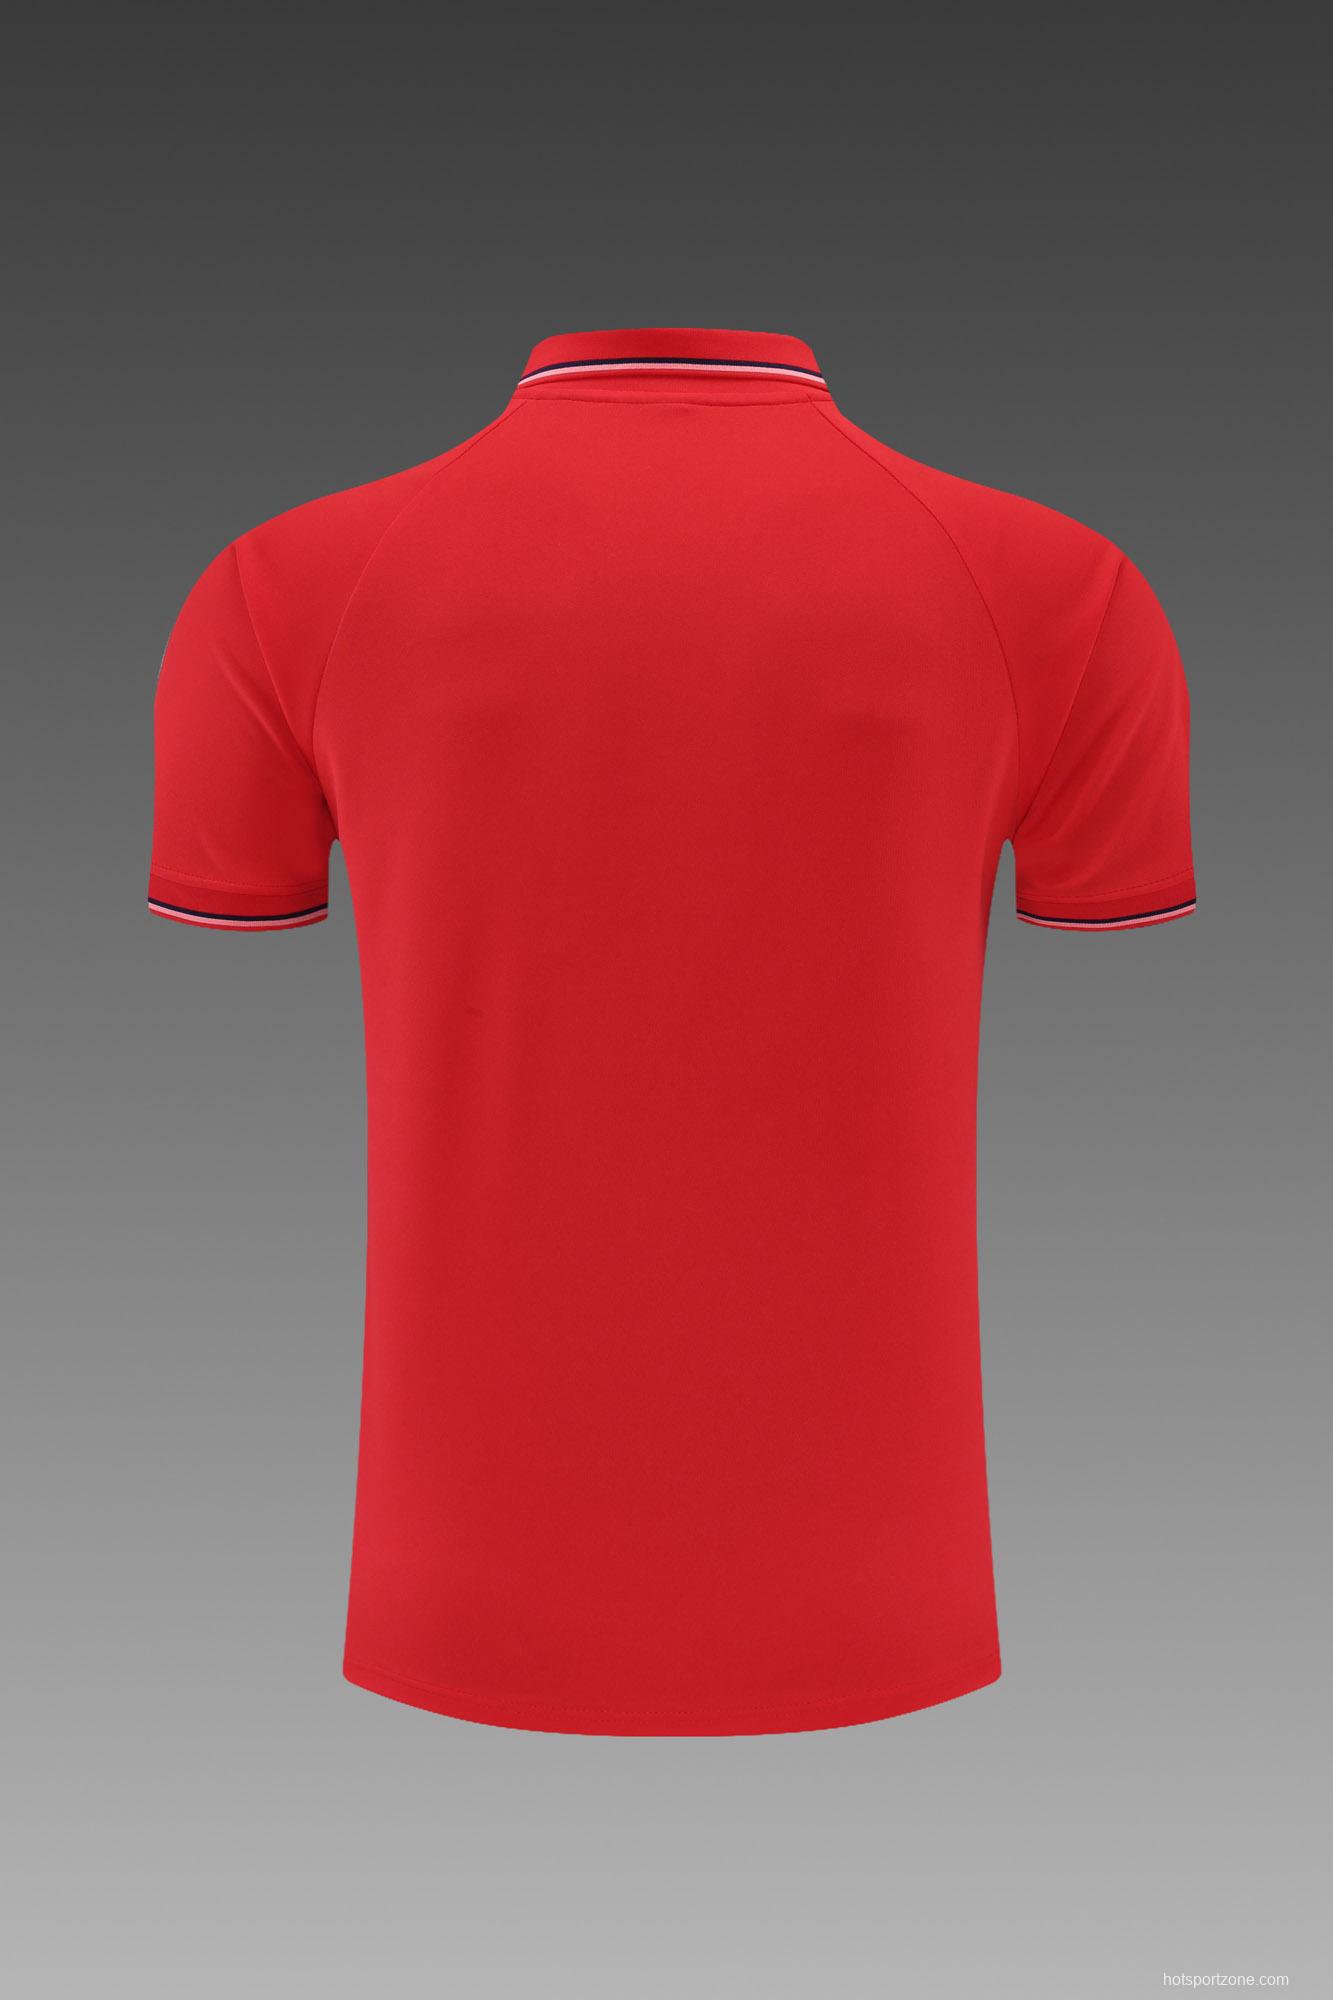 Atletico Madrid POLO kit red and white pattern(not supported to be sold separately)